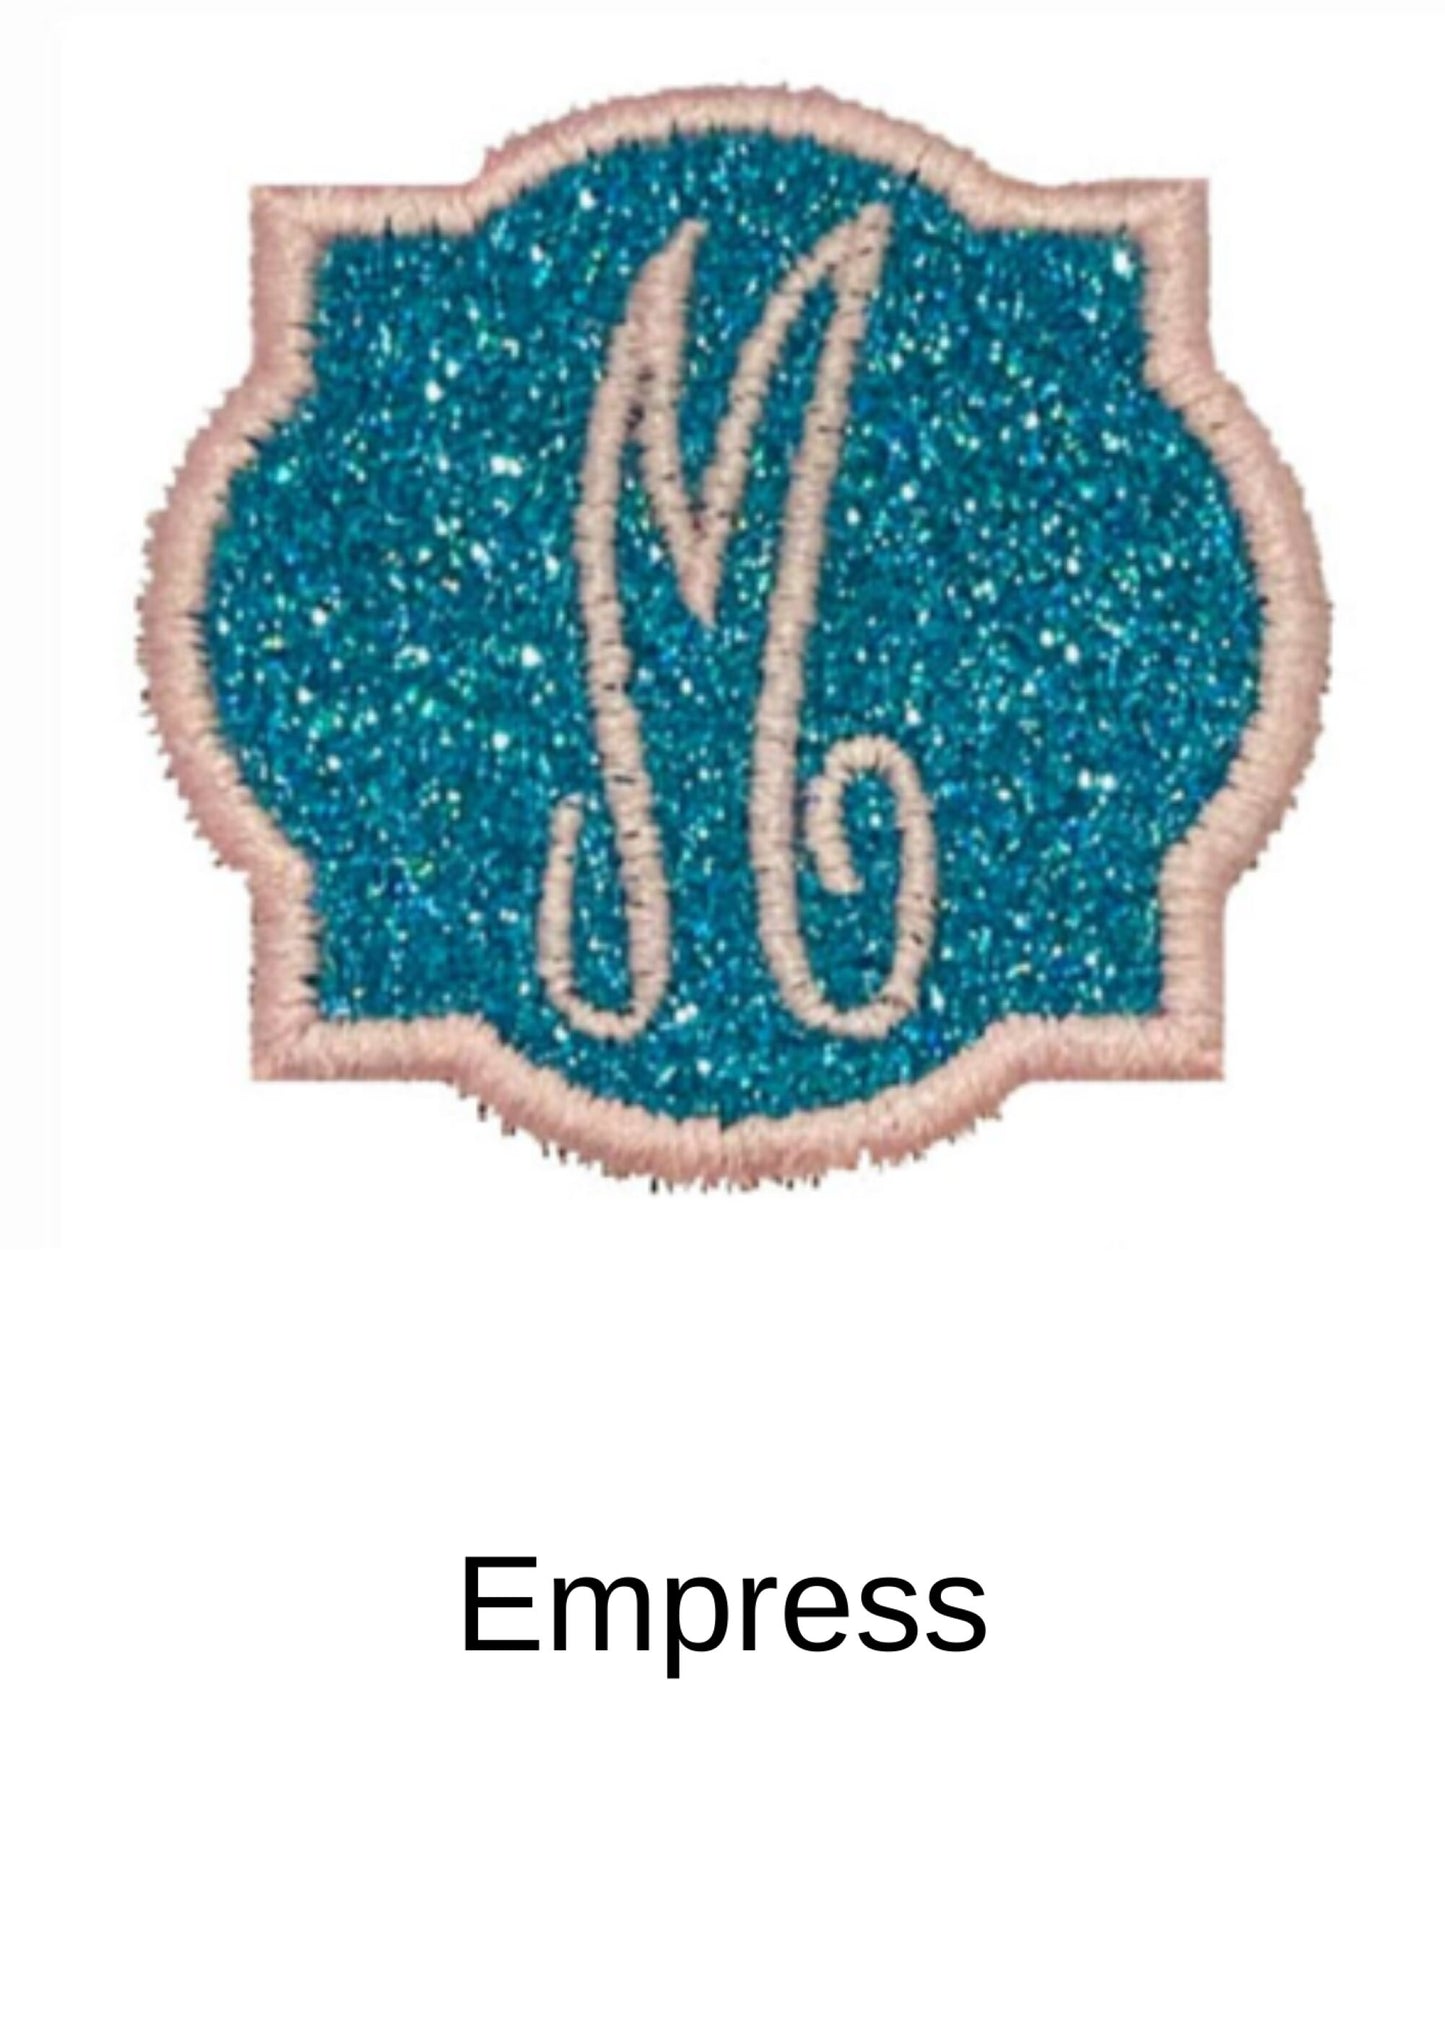 Fancy Glitter initial patch glitter patch with initial glitter patch glitter with monogram personalized patch glitter iron on patch GL435